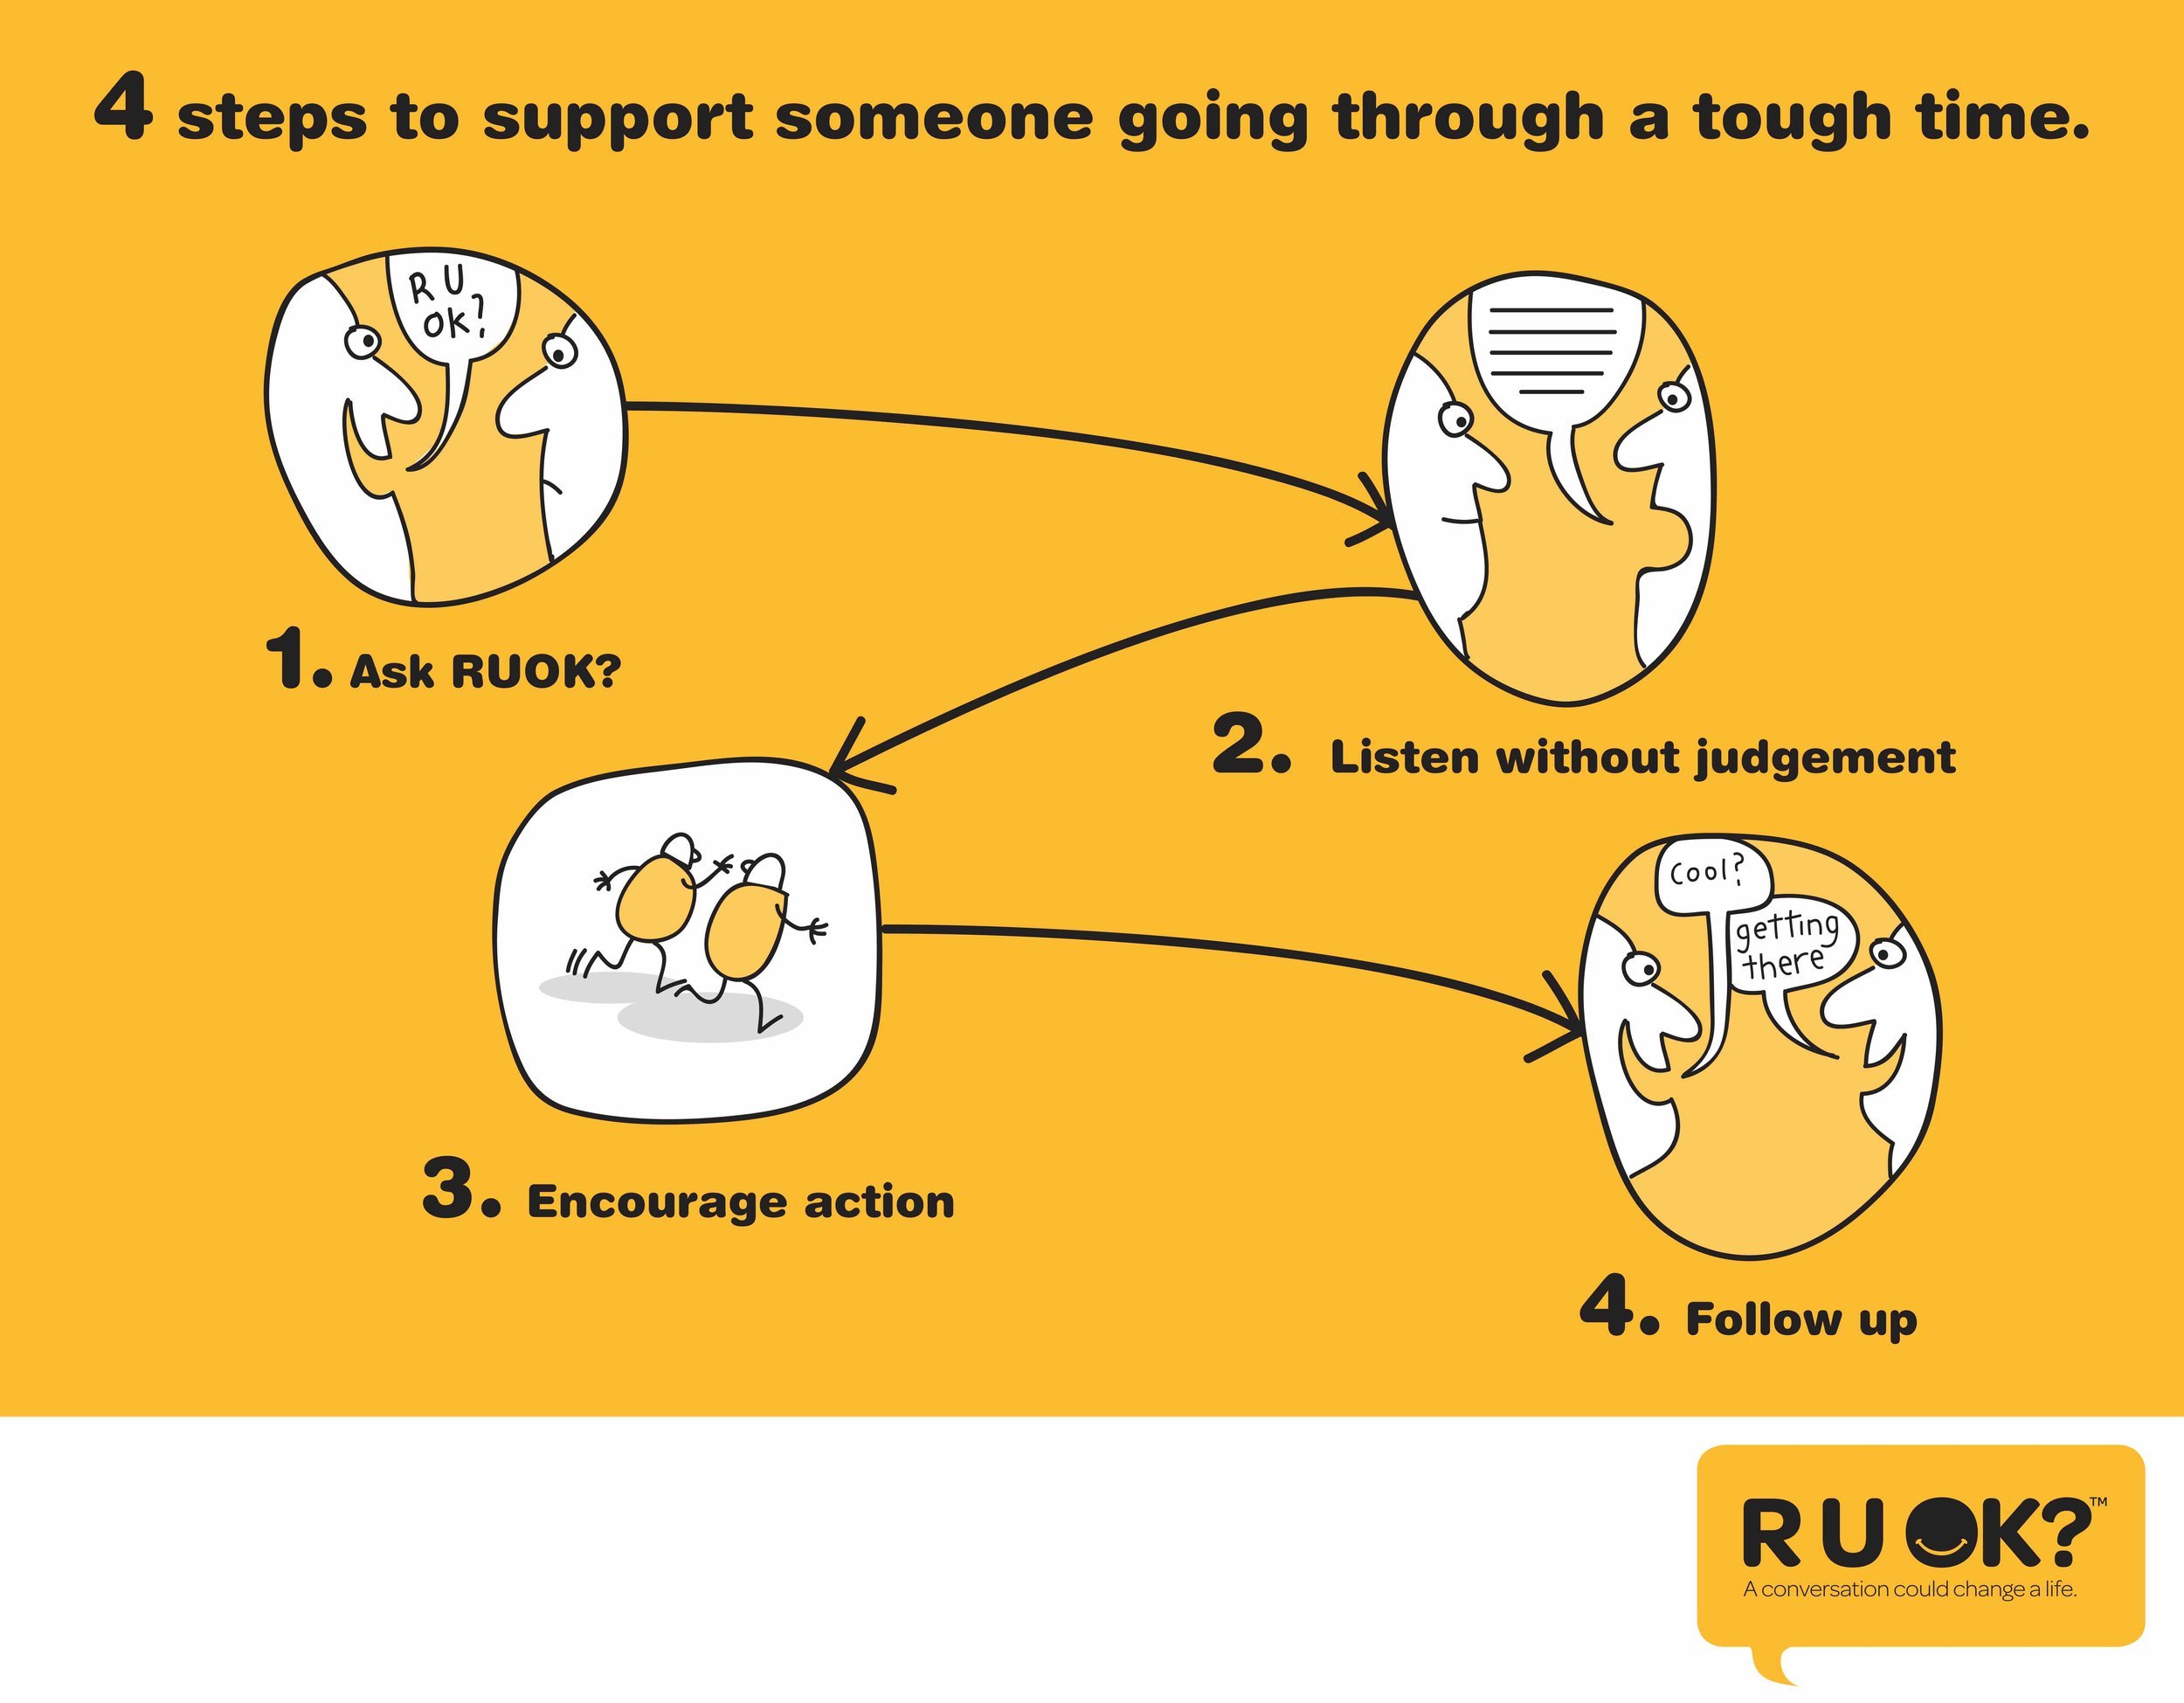   RUOK?  The long lasting ‘start a conversation’ campaign for suicide prevention organisation RUOK?  